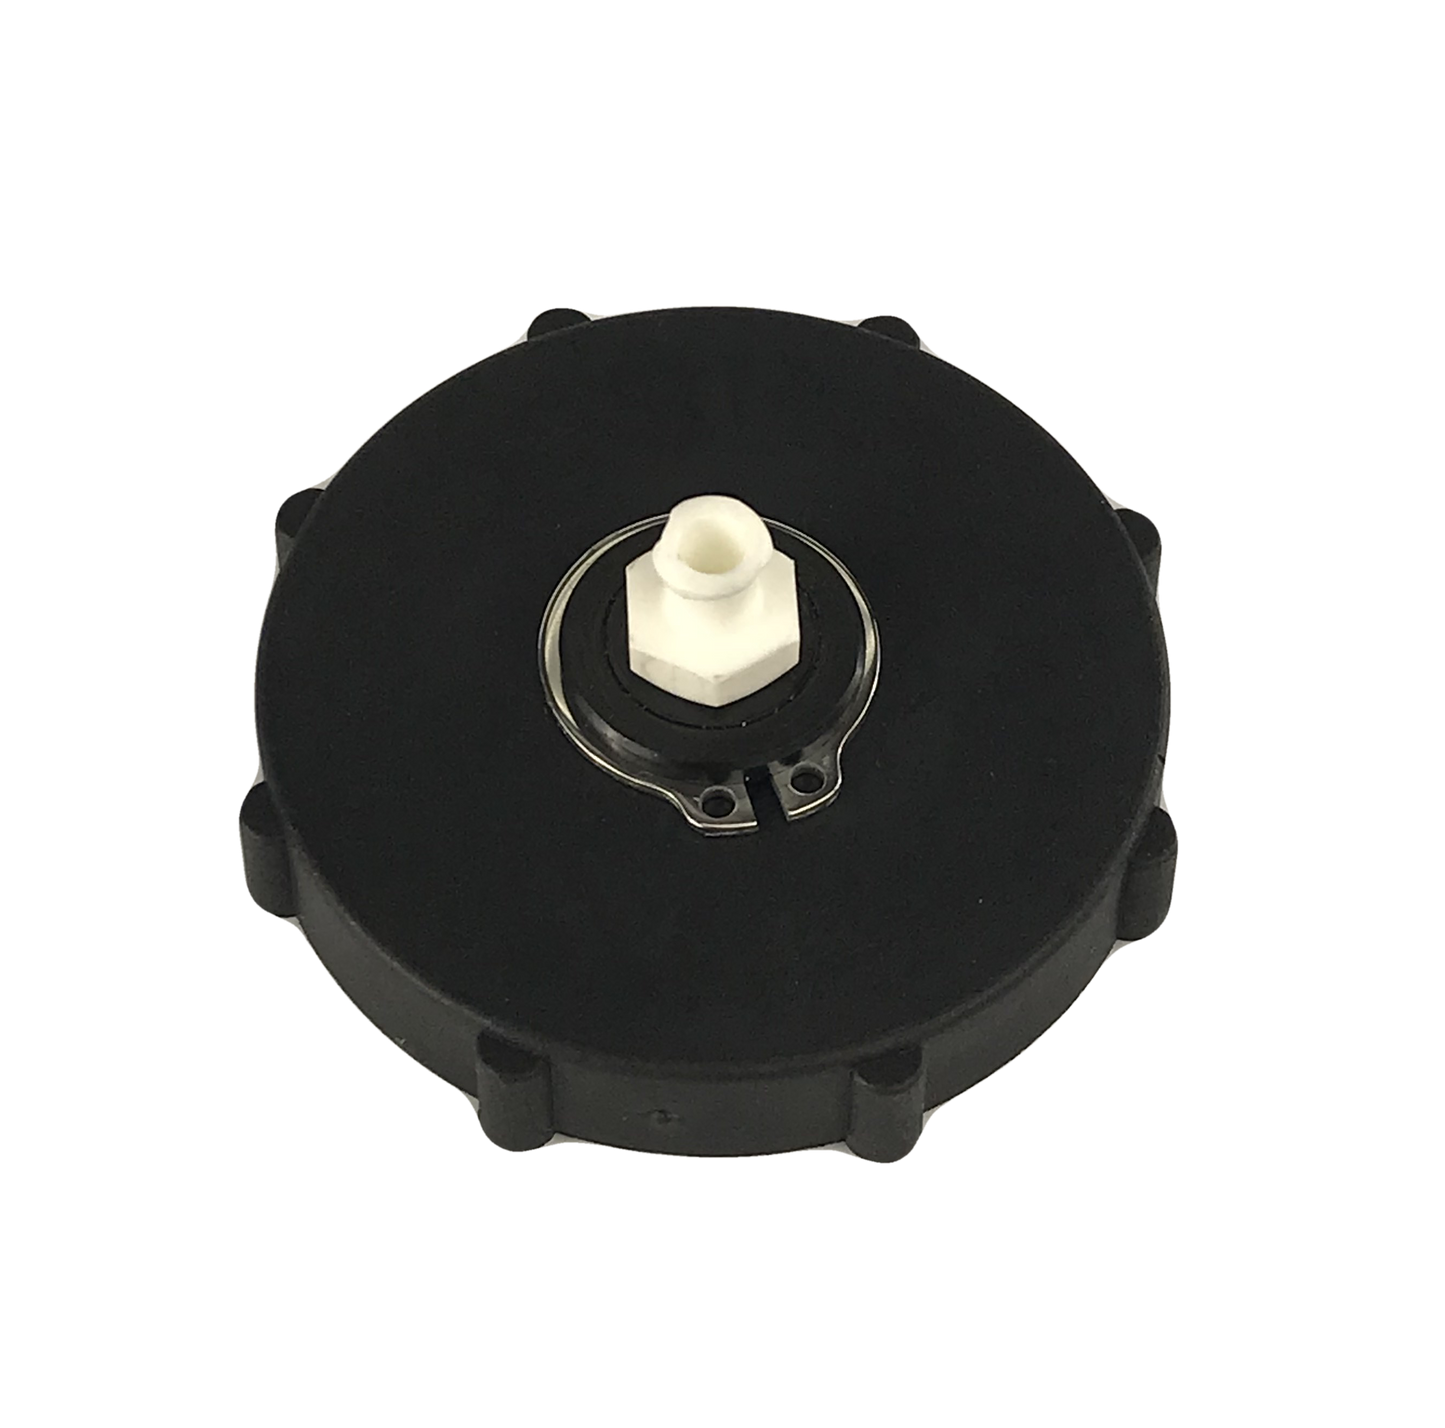 Black BC-03 Master Cylinder Cap Adapter with a white threaded top sits on a gray background. The adapter is designed for bleeding the brakes on Nissan and most late model GM vehicles. It is a low-pressure adapter, designed for 15-17 psi. It is made of durable plastic and is easy to install. The adapter creates a good seal on the master cylinder reservoir and is easy to identify with its  threaded top.